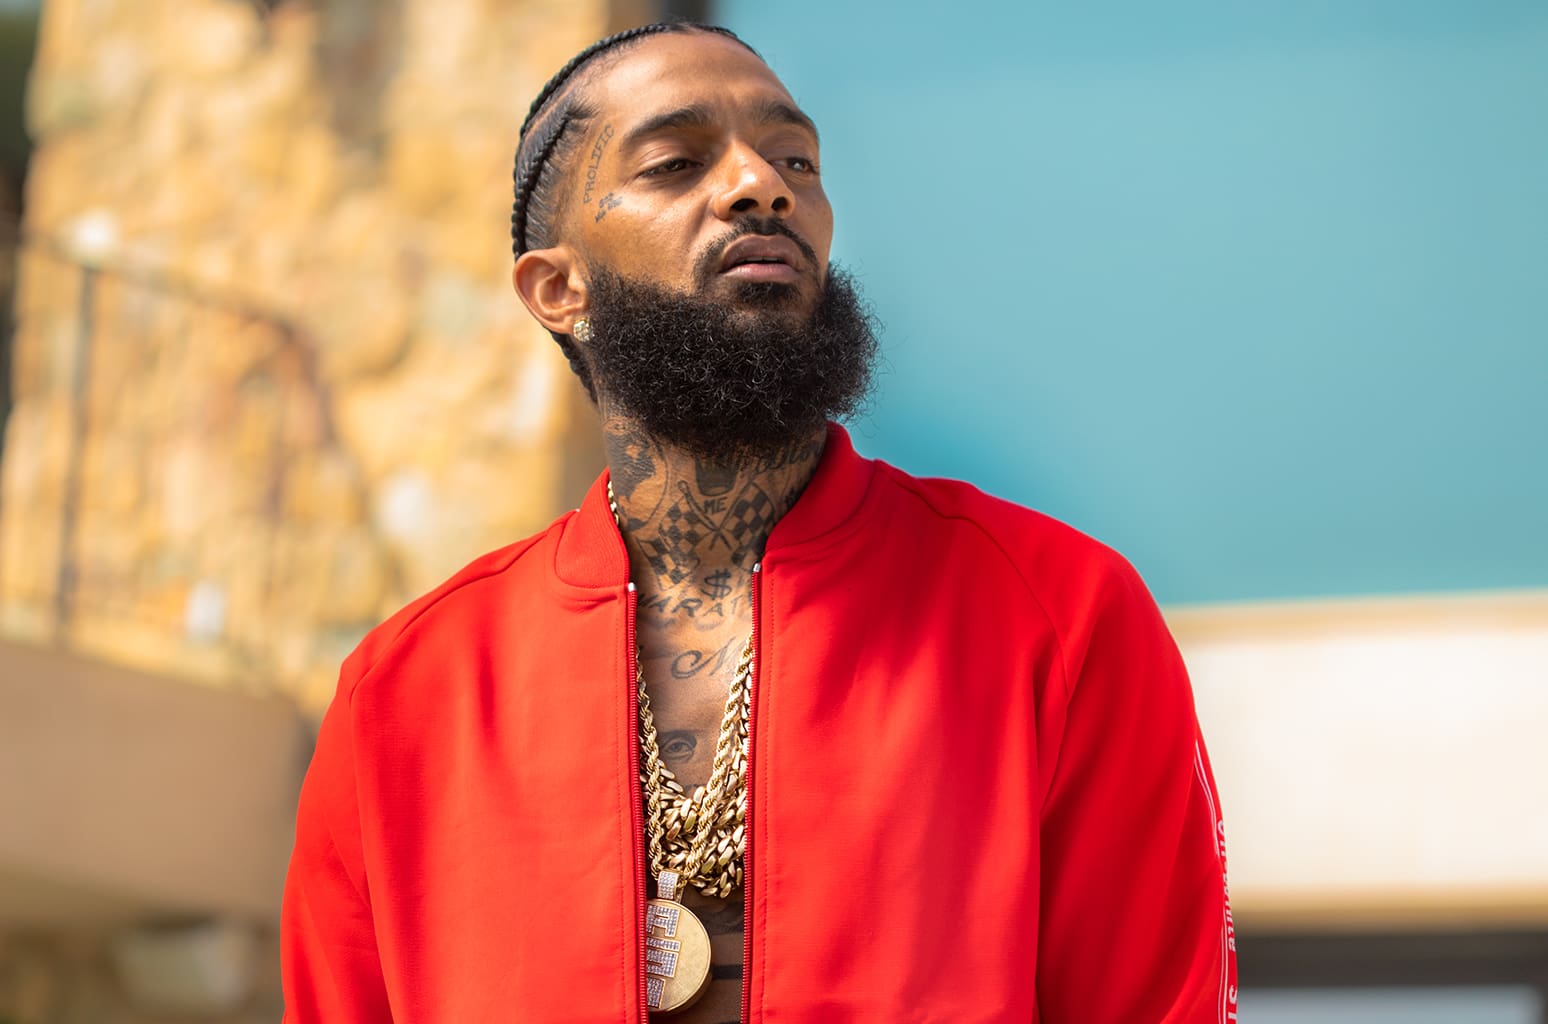 The Game Says That His Friendship With Nipsey Hussle Cost Him Crucial Gang Connections, But Their Union Was 'Bigger Than Life'